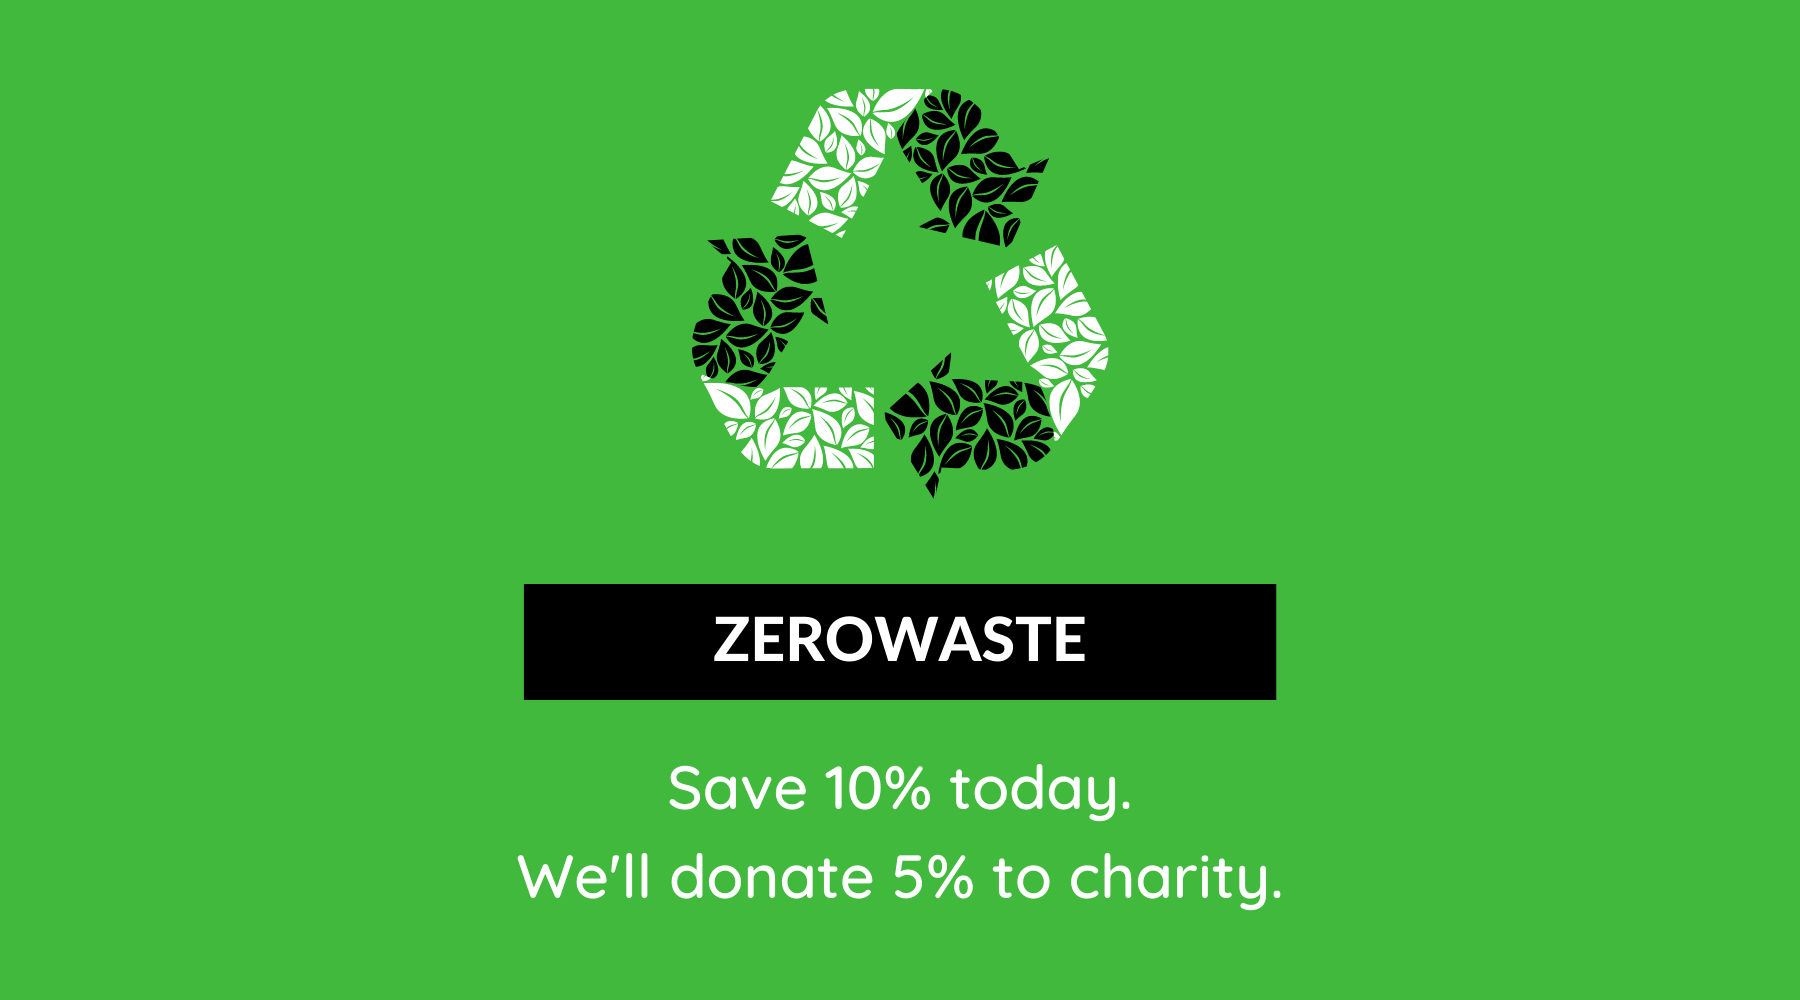 Zero Waste Week in support of our oceans